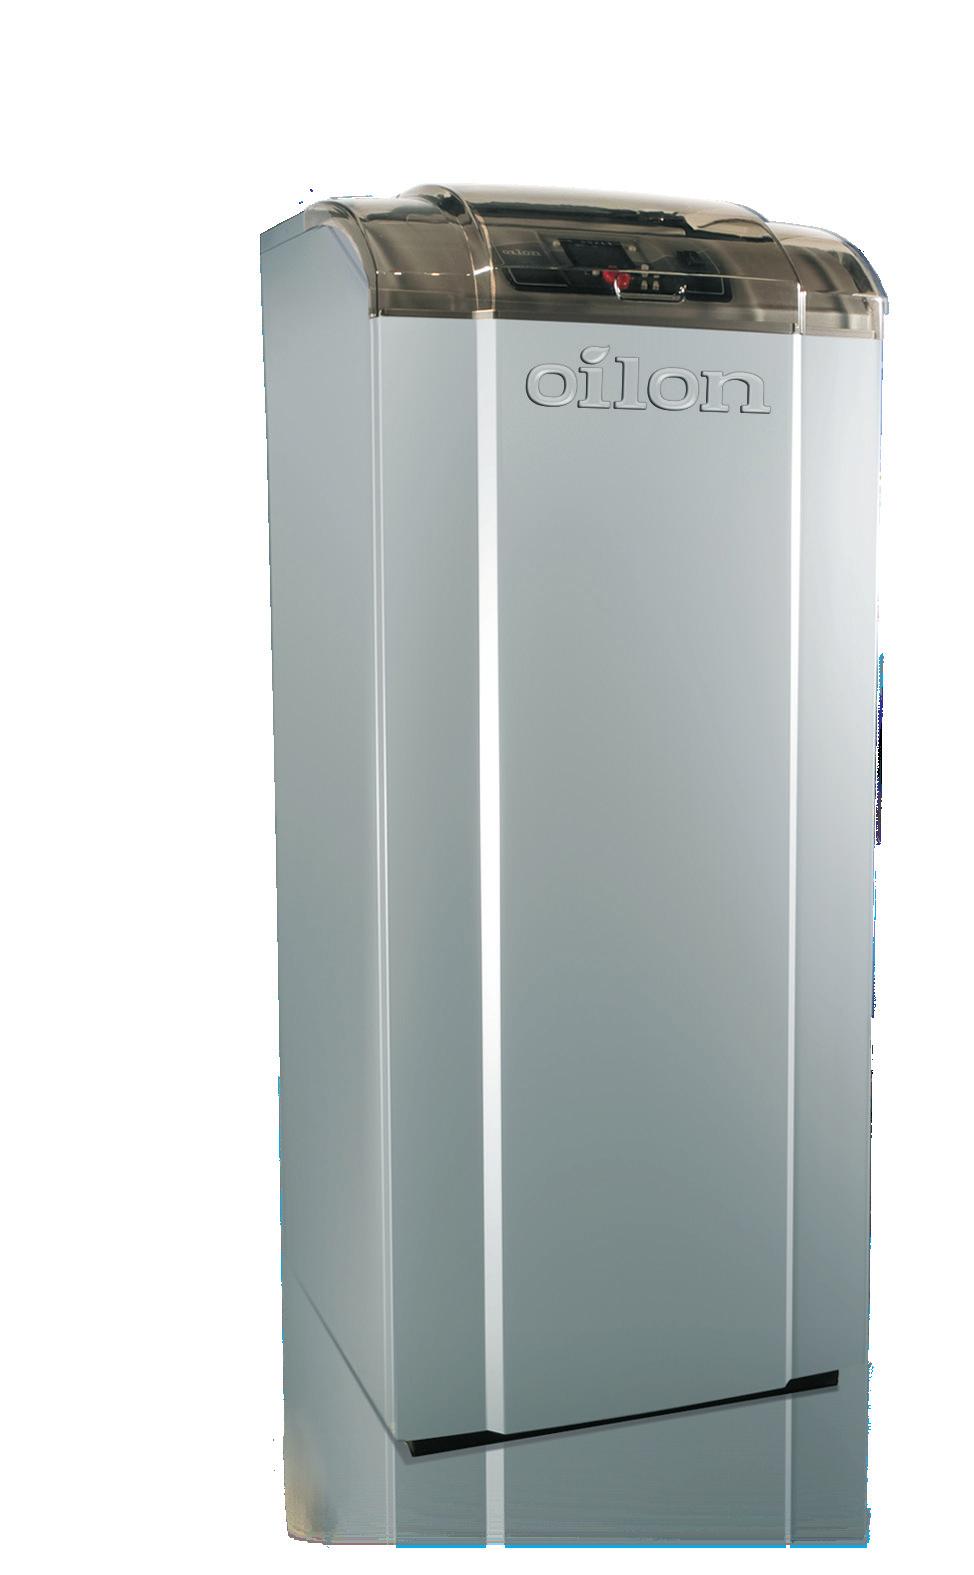 The Oilon GT heat pump is easy to connect to an existing thermal storage tank, for example to a wood or oil heating system or to an electrical accumulator.